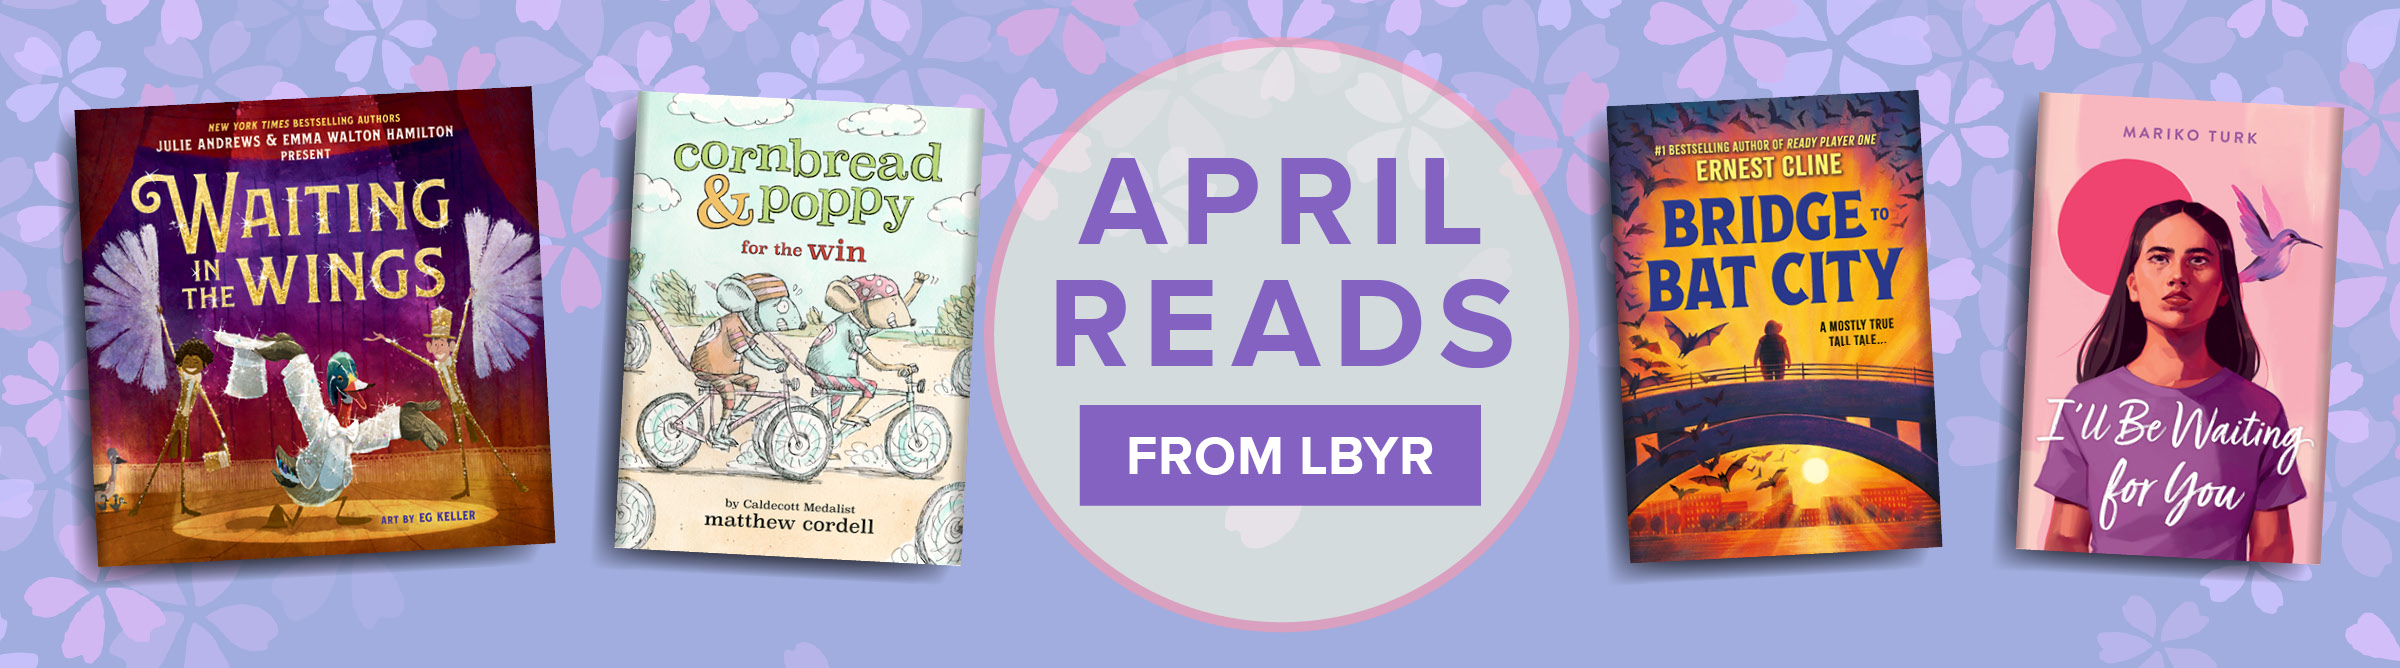 April Reads from LBYR banner with images of book covers WAITING IN THE WINGS, CORNBREAD & POPPY FOR THE THE WIN, BRIDGE TO BAT CITY, and I'LL BE WAITING FOR YOU.